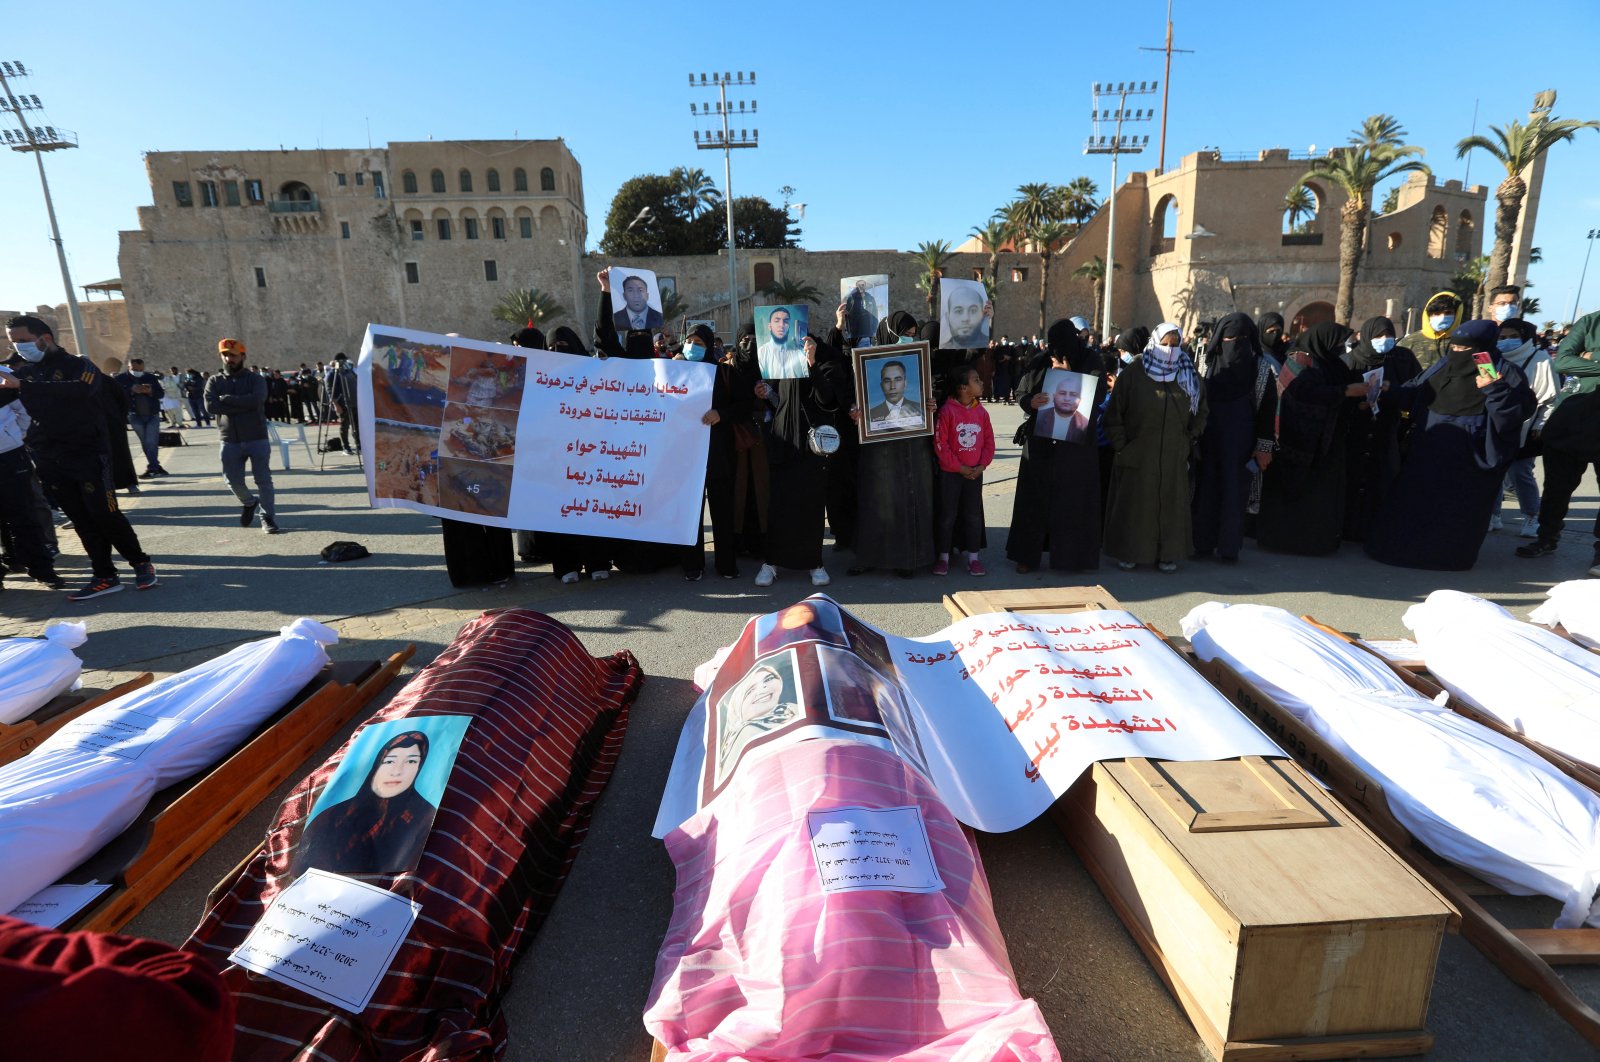 Mourners show portraits near bodies which were exhumed from a mass grave in Tarhuna, before getting reburied in Tripoli, Libya, Jan. 22, 2021. (REUTERS)